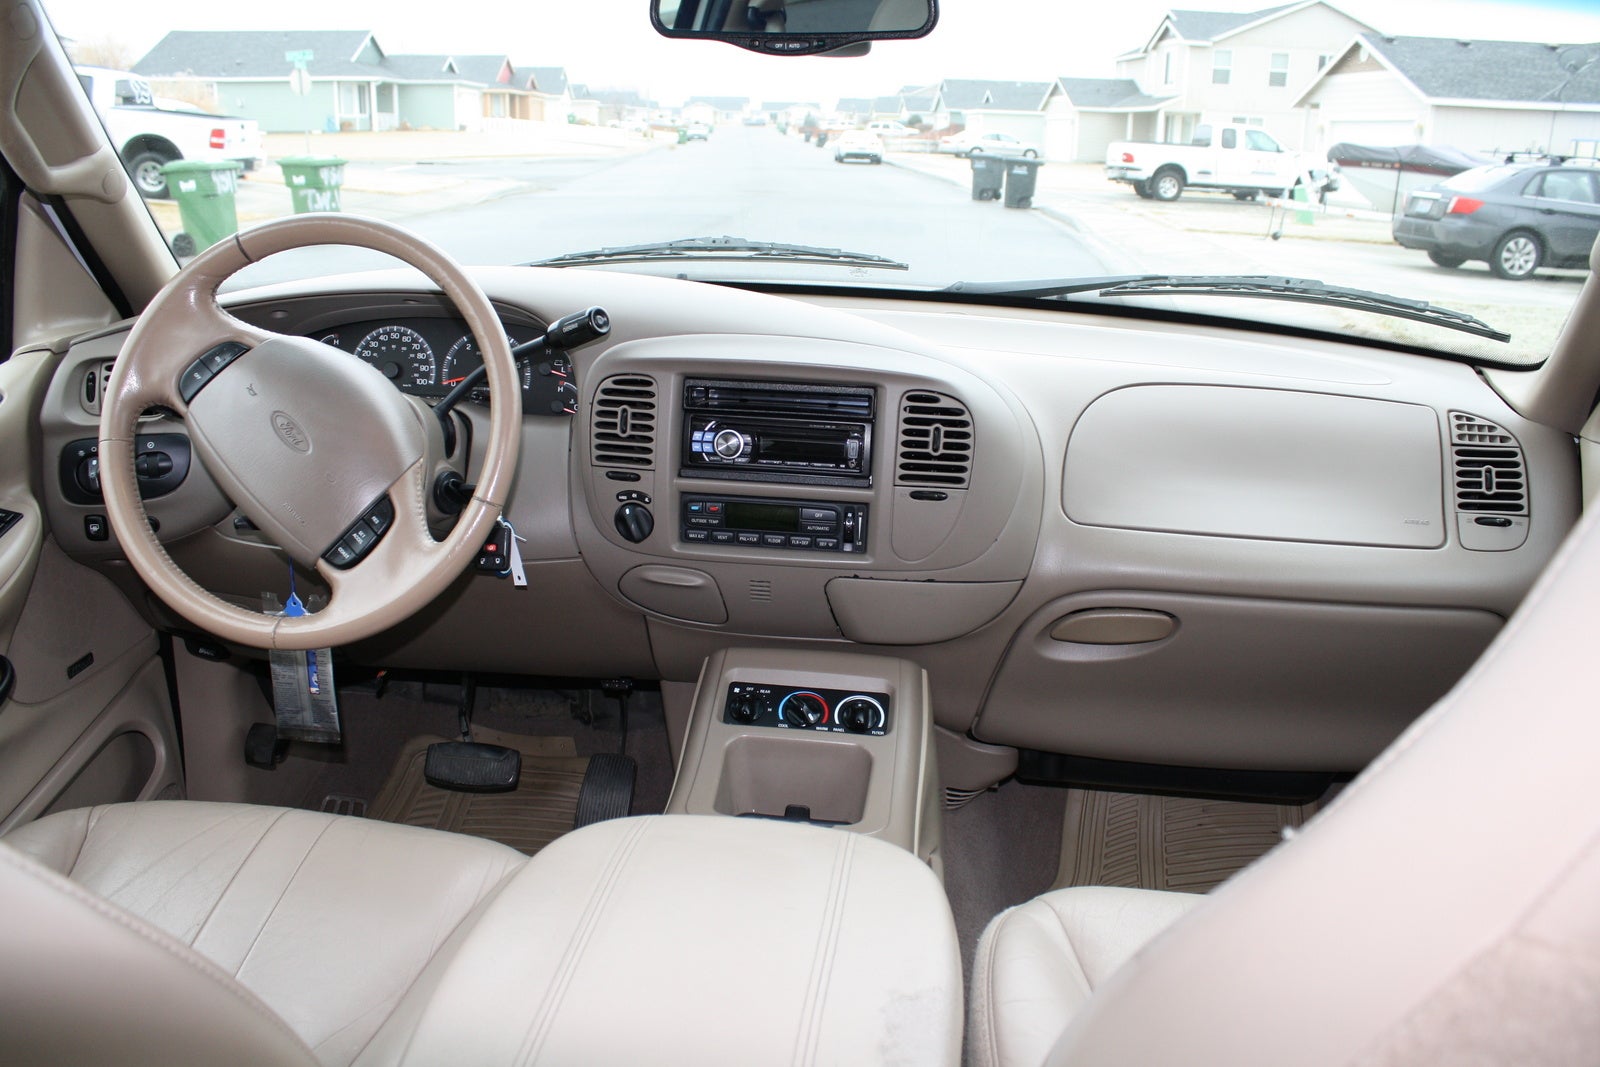 Picture Of 2000 Ford Expedition Eddie Bauer 4wd Interior, 1600x1067 in 460....